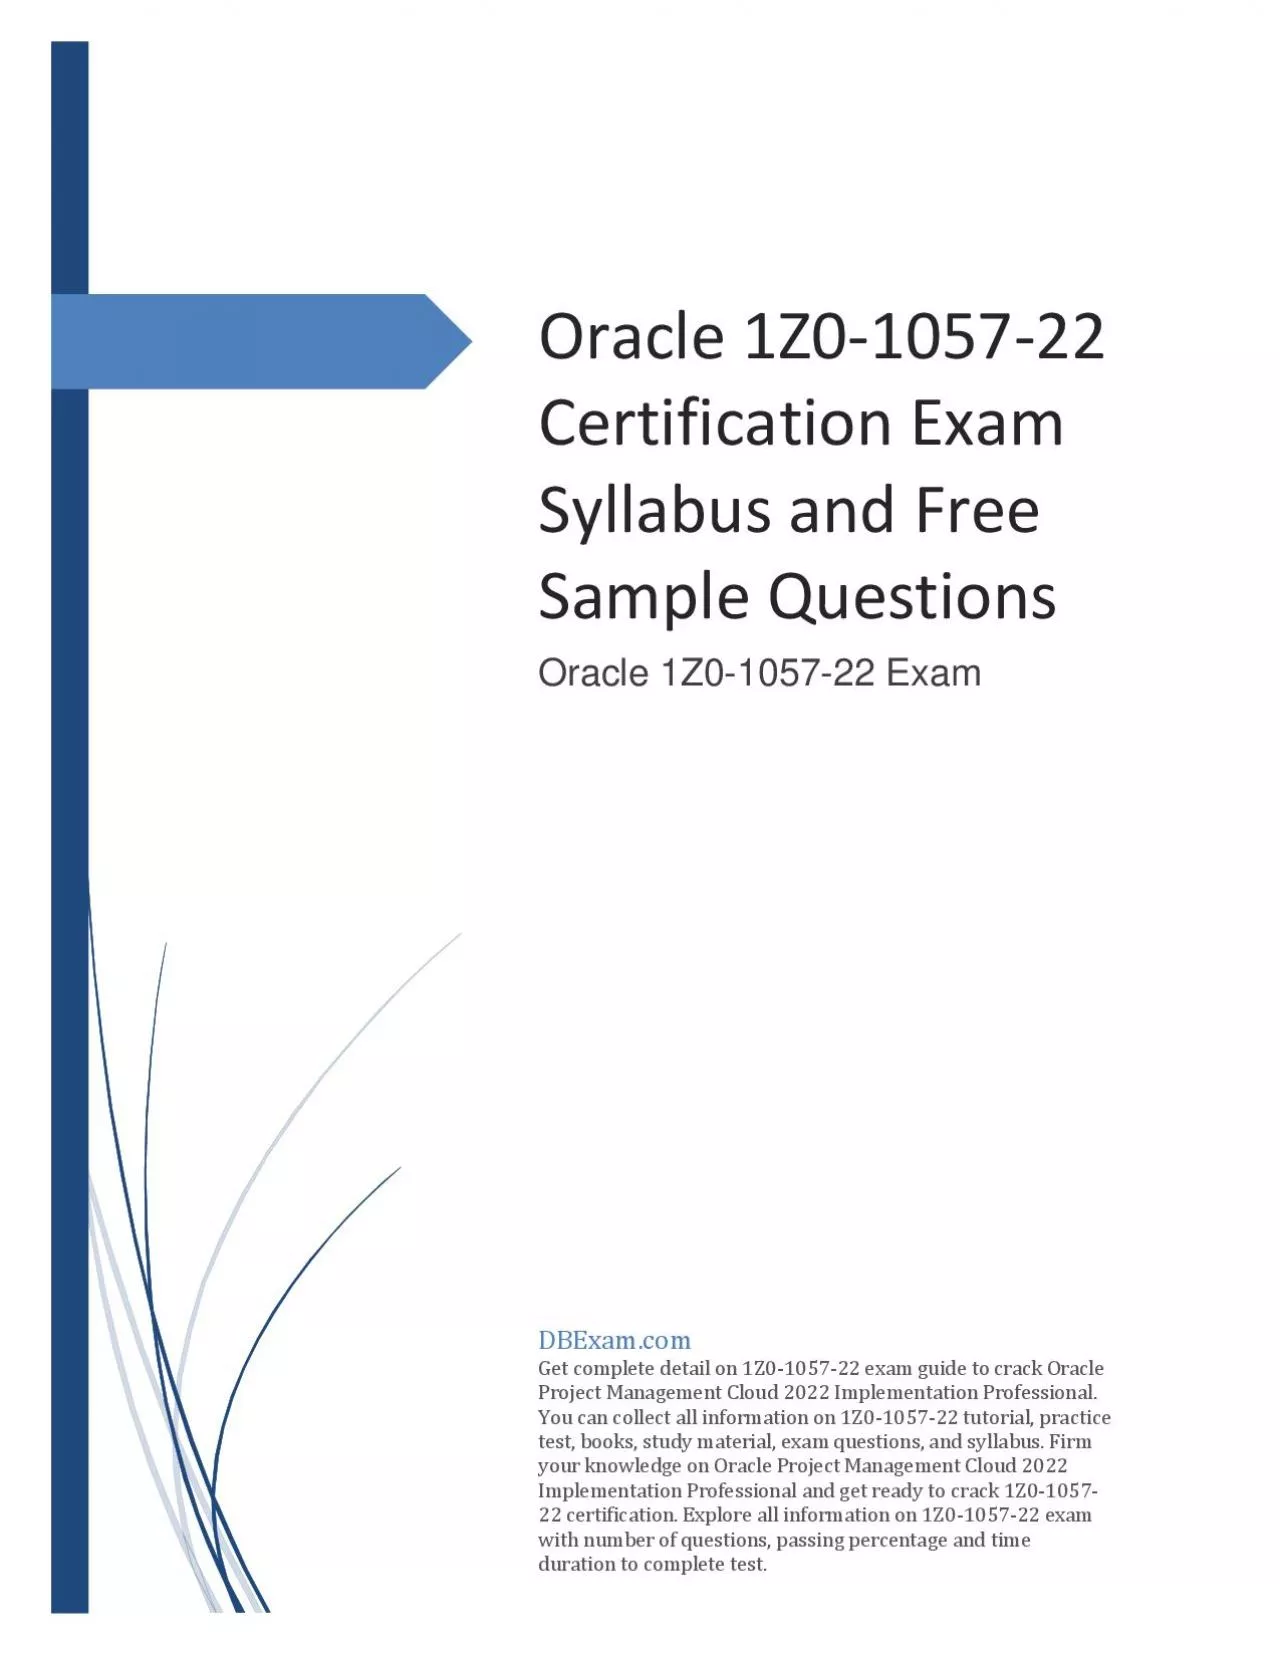 Oracle 1Z0-1057-22 Certification Exam Syllabus and Free Sample Questions